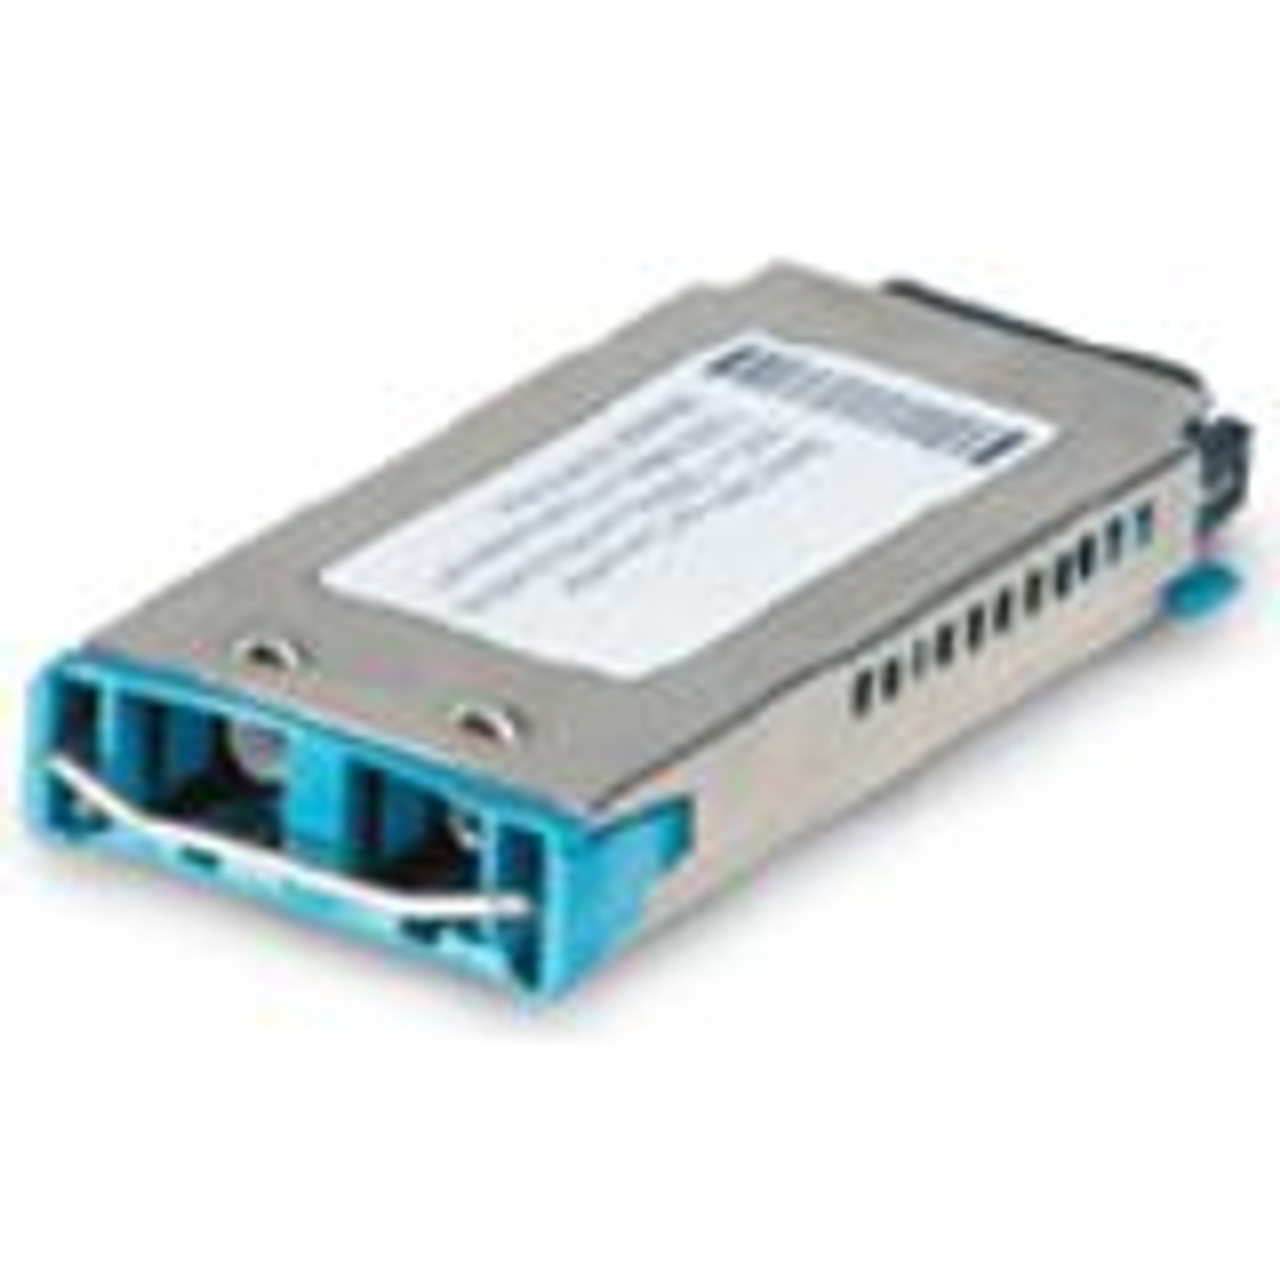 990-01999-07 Allied Telesis AT-G8ZX70 1.25Gbps 1000Base-ZX Single-mode Fiber 70km 1470nm SC Connector GBIC Transceiver Module